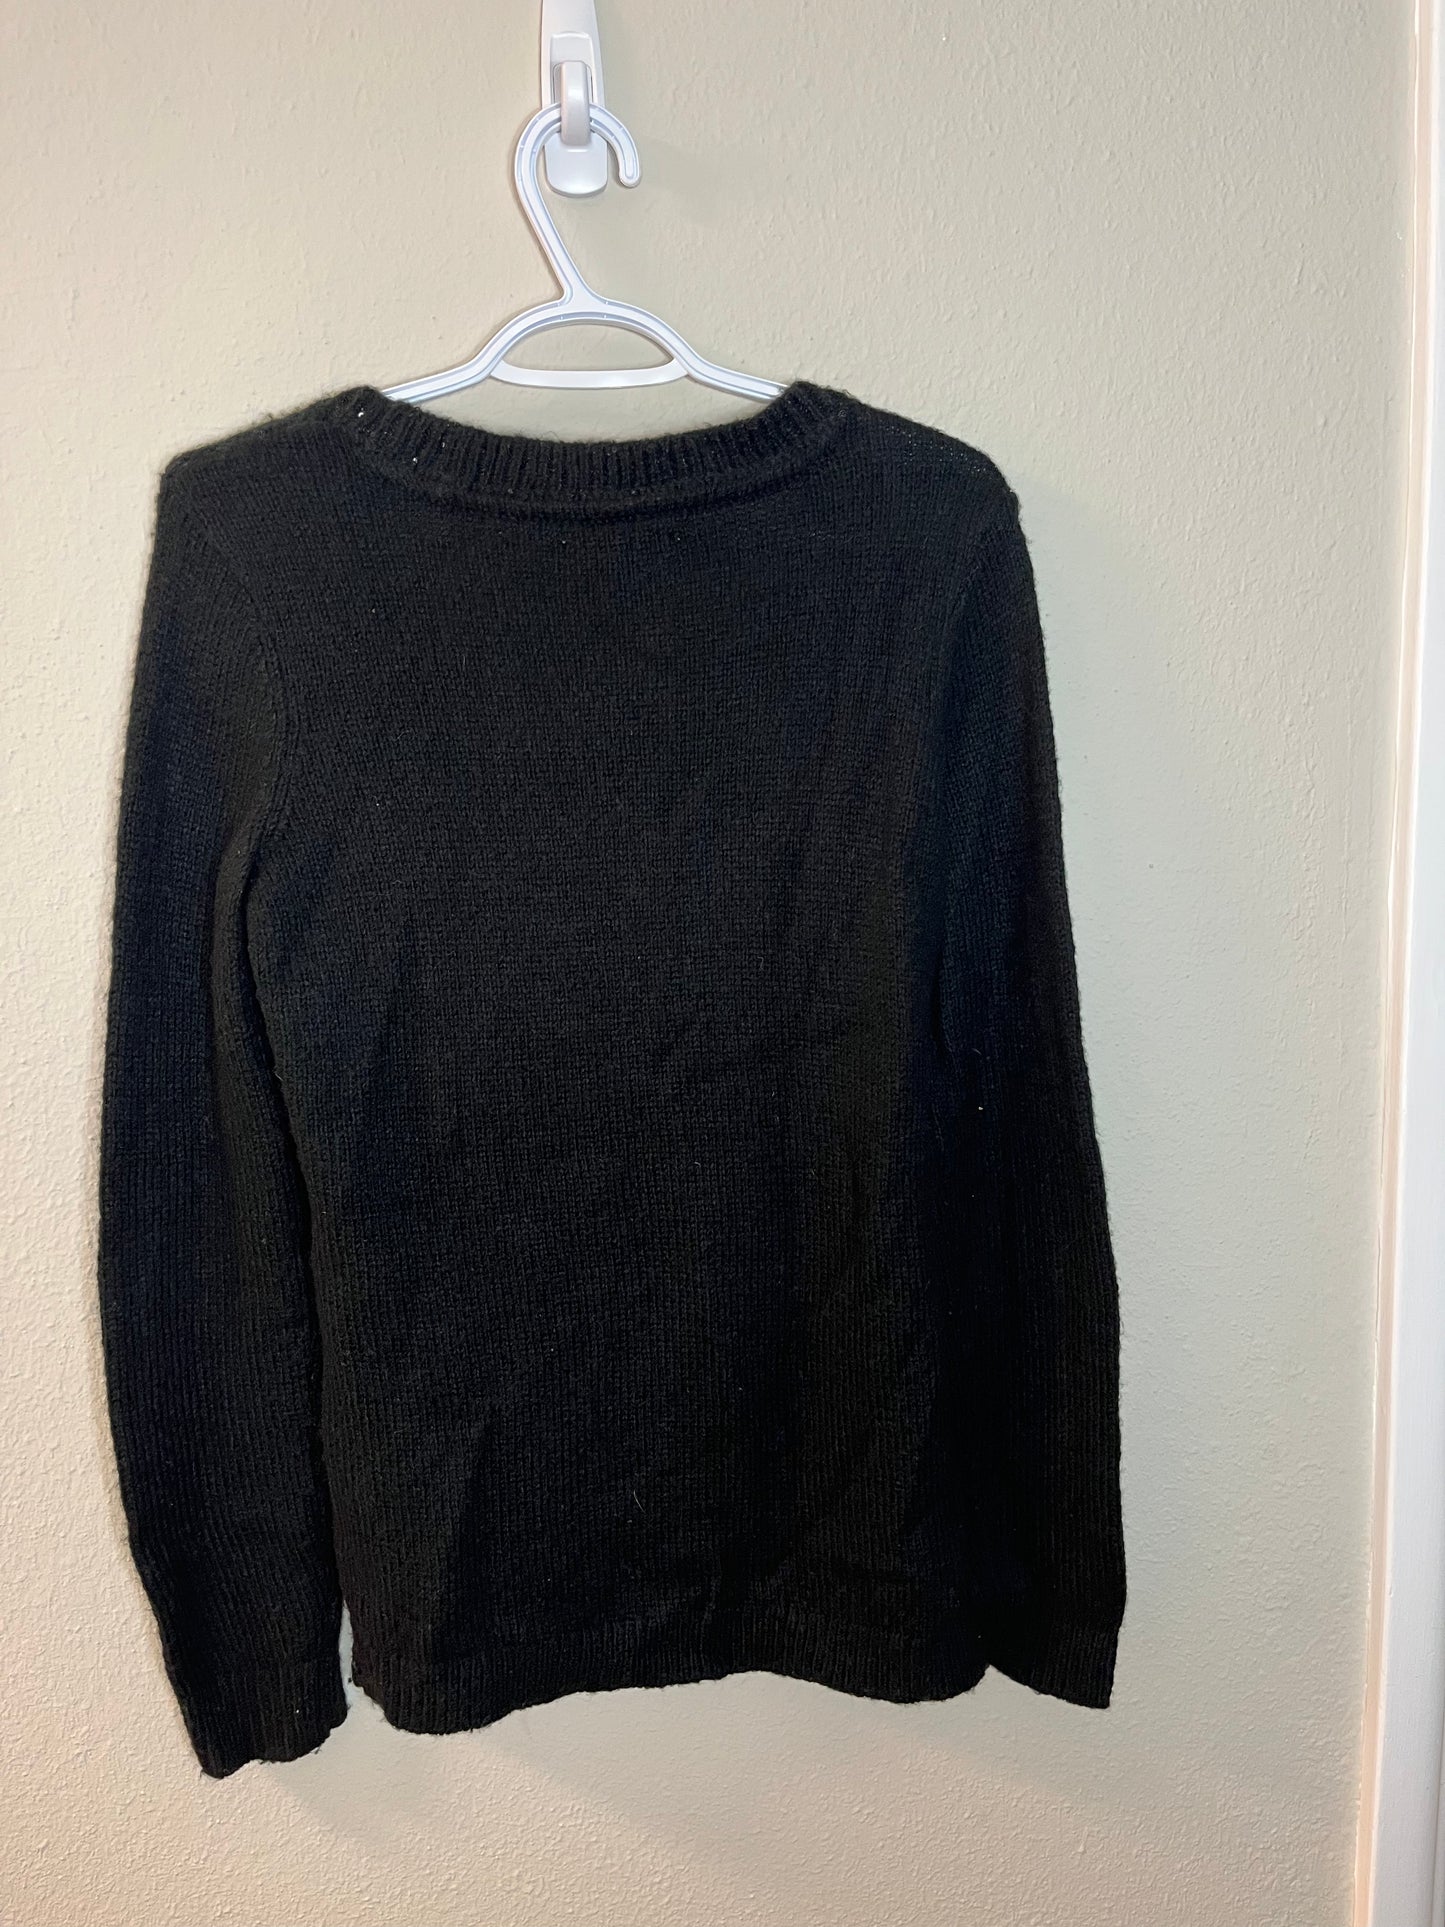 Tommy Hilfiger Sweater (small)